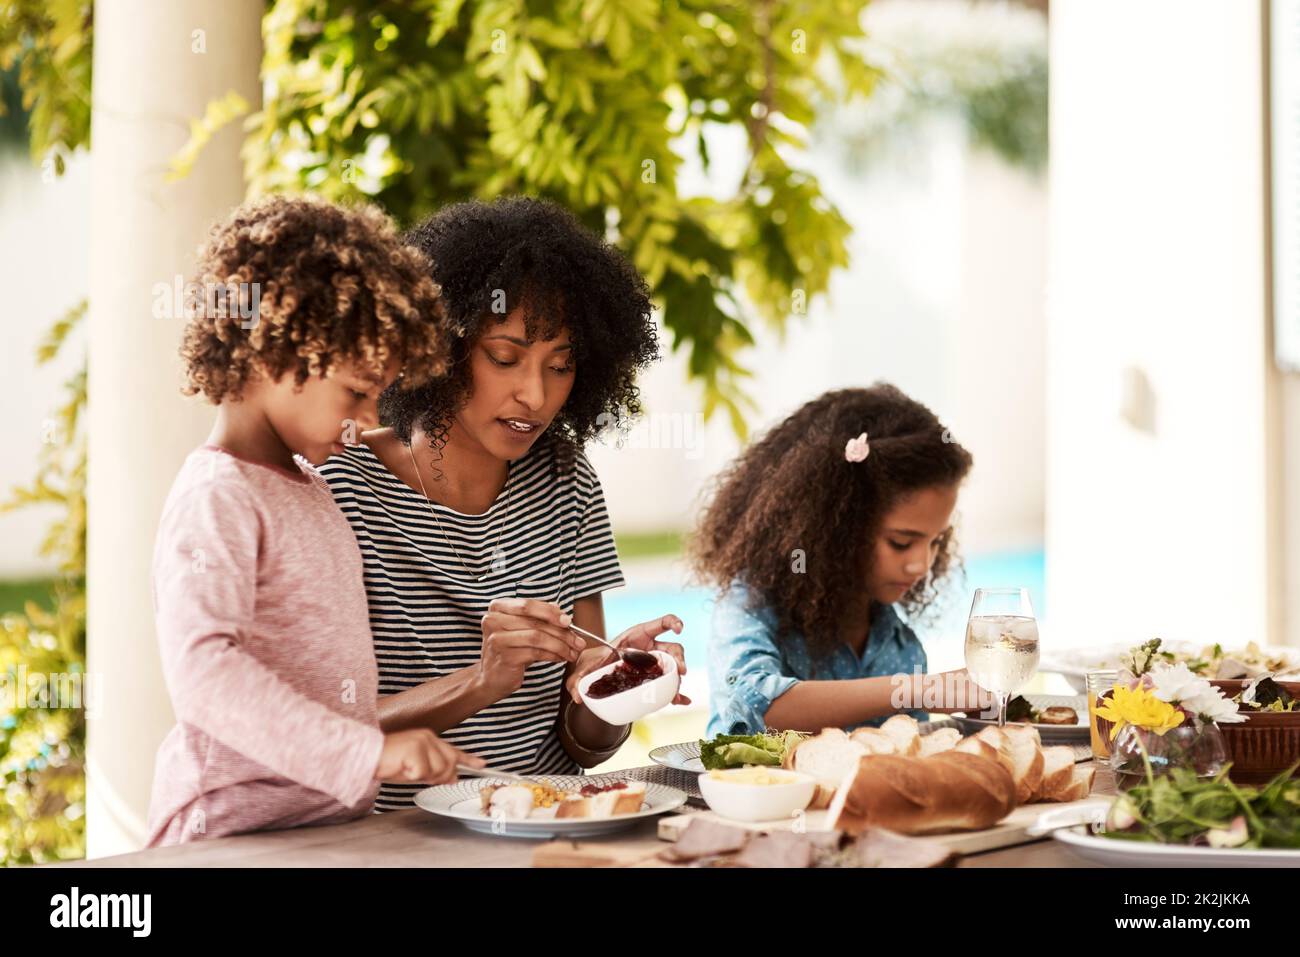 Lets eat kids. Cropped shot of a young woman enjoying a meal with her children at home. Stock Photo